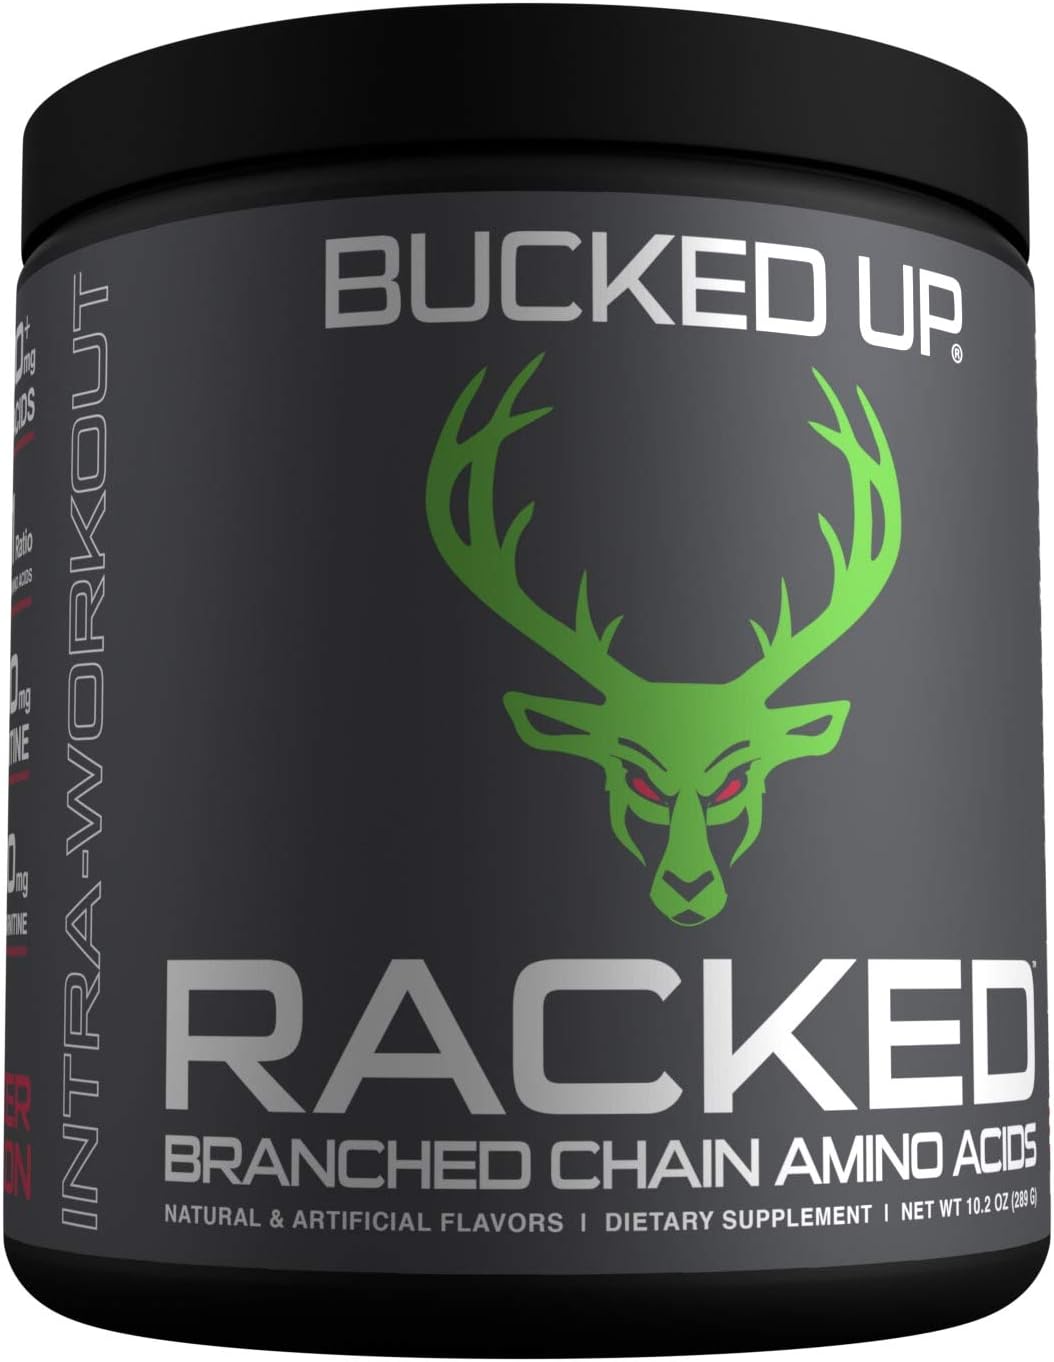 Bucked Up- BCAA RACKED? Branch Chained Amino Acids | L-Carnitine, Acetyl L-Carnitine, GBB | Post Workout Recovery, Protein Synthesis, Lean Muscle BCAAs That You Can Feel! 30 Servings (Watermelon)